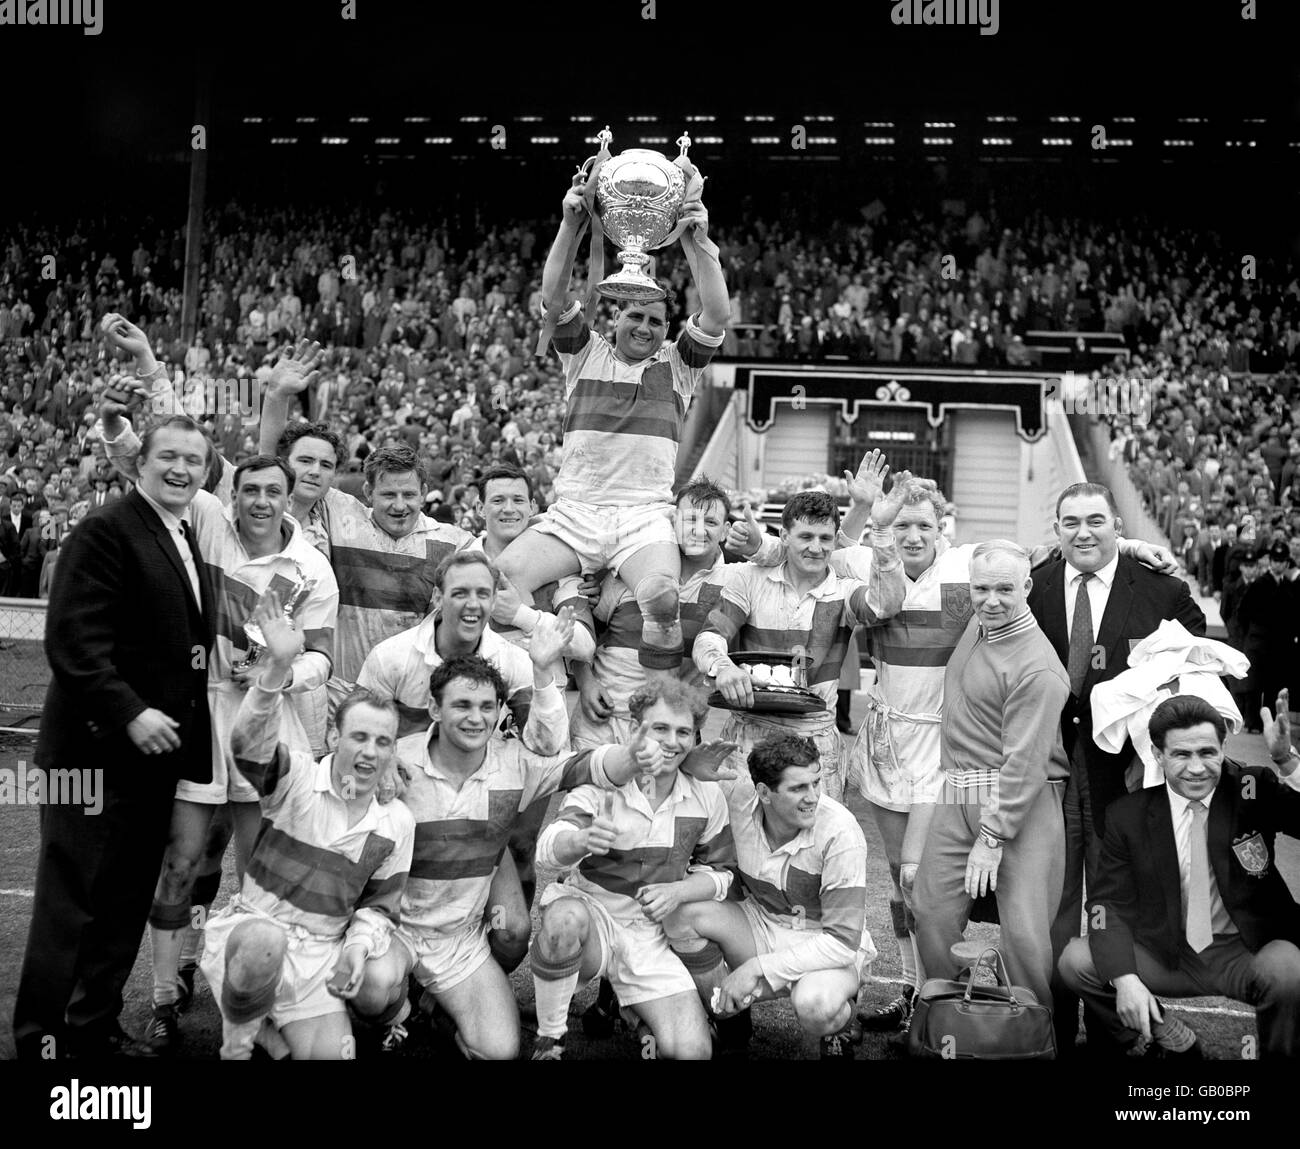 Wakefield Trinity team hoist aloft their Captain D. Turner who is lifting up the Challenge Cup Stock Photo